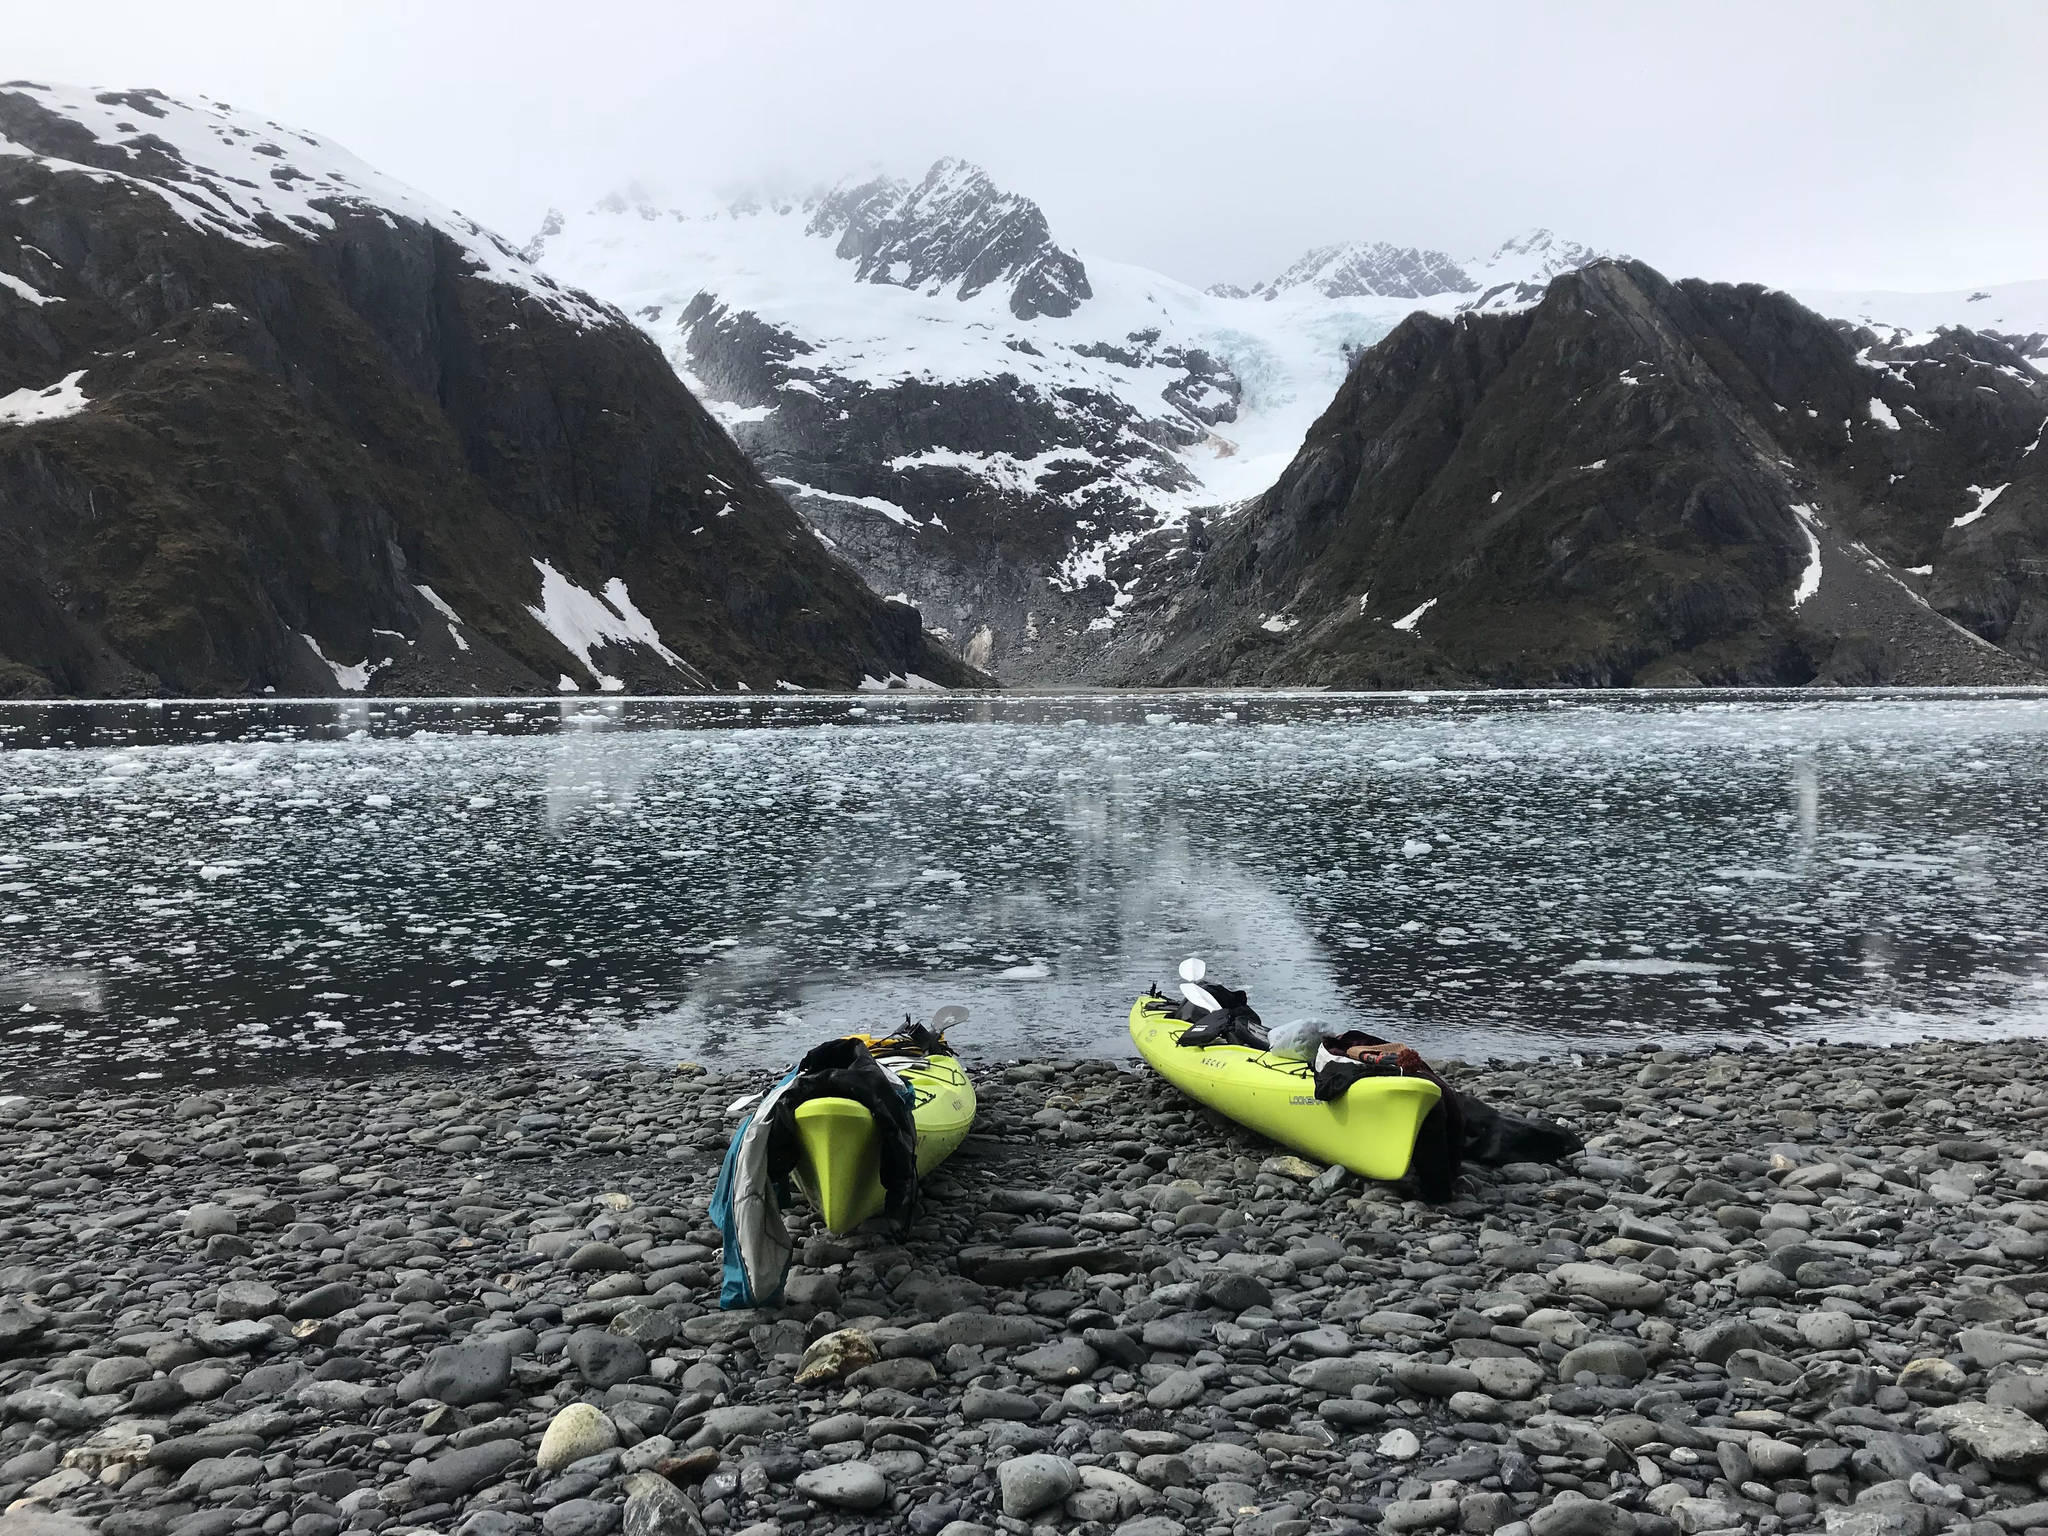 Two kayaks sit on a beach in Aialik Bay during a trip with Liquid Adventures kayaking company, based in Seward, in summer 2018. (Photo by Kat Sorensen/Peninsula Clarion)